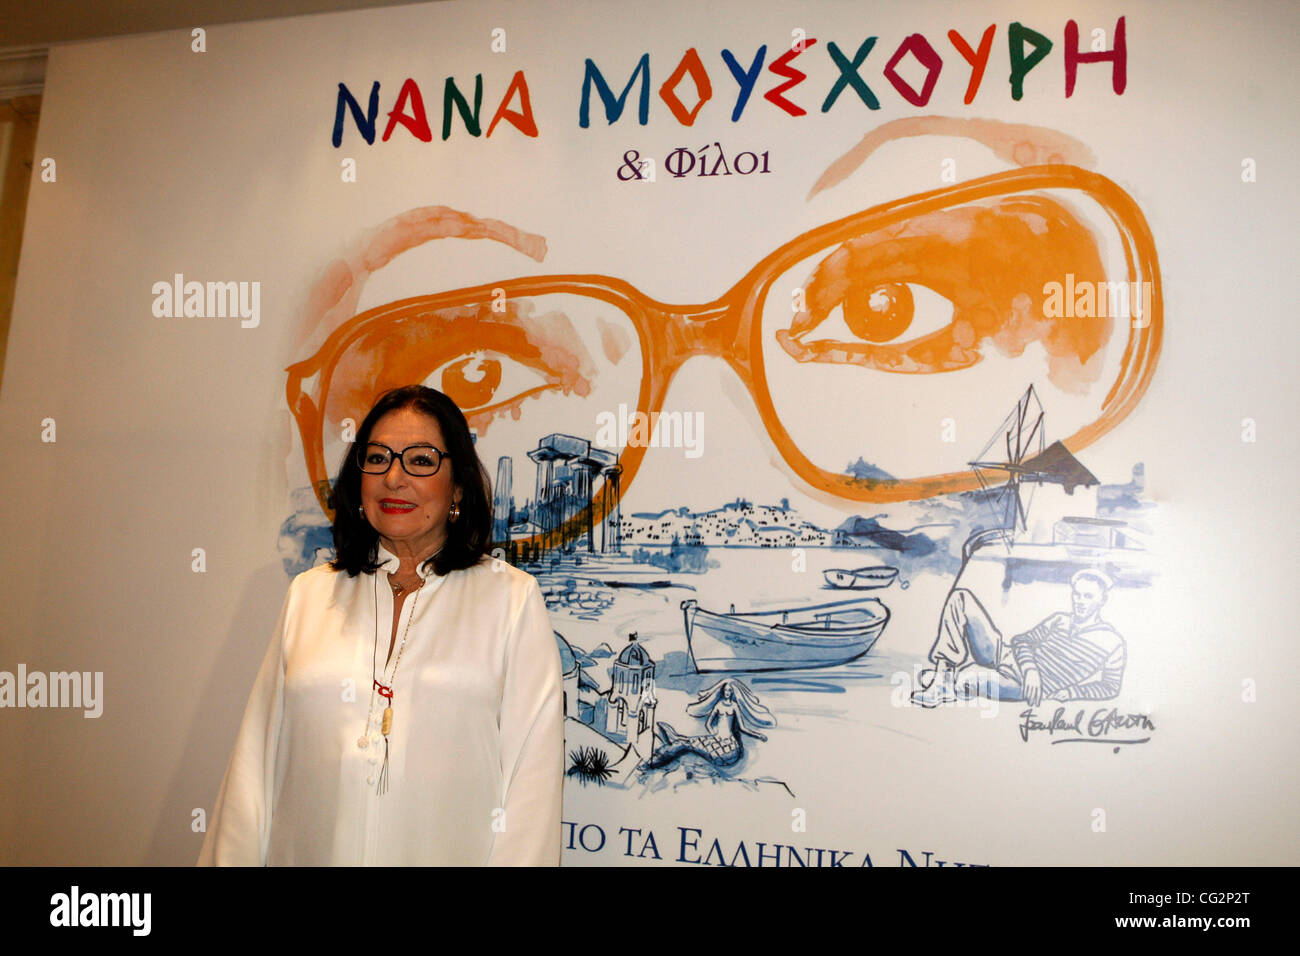 Oct. 10, 2011 - Athens, Greece - The famous Greek singer NANA MOUSKOURI presents her new CD ''Nana Mouskouri and Friends'' with traditional songs from the Greek islands. The cover was designed by her good friend, Jean Paul Gaultier. (Credit Image: © Aristidis Vafeiadakis/ZUMAPRESS.com) Stock Photo